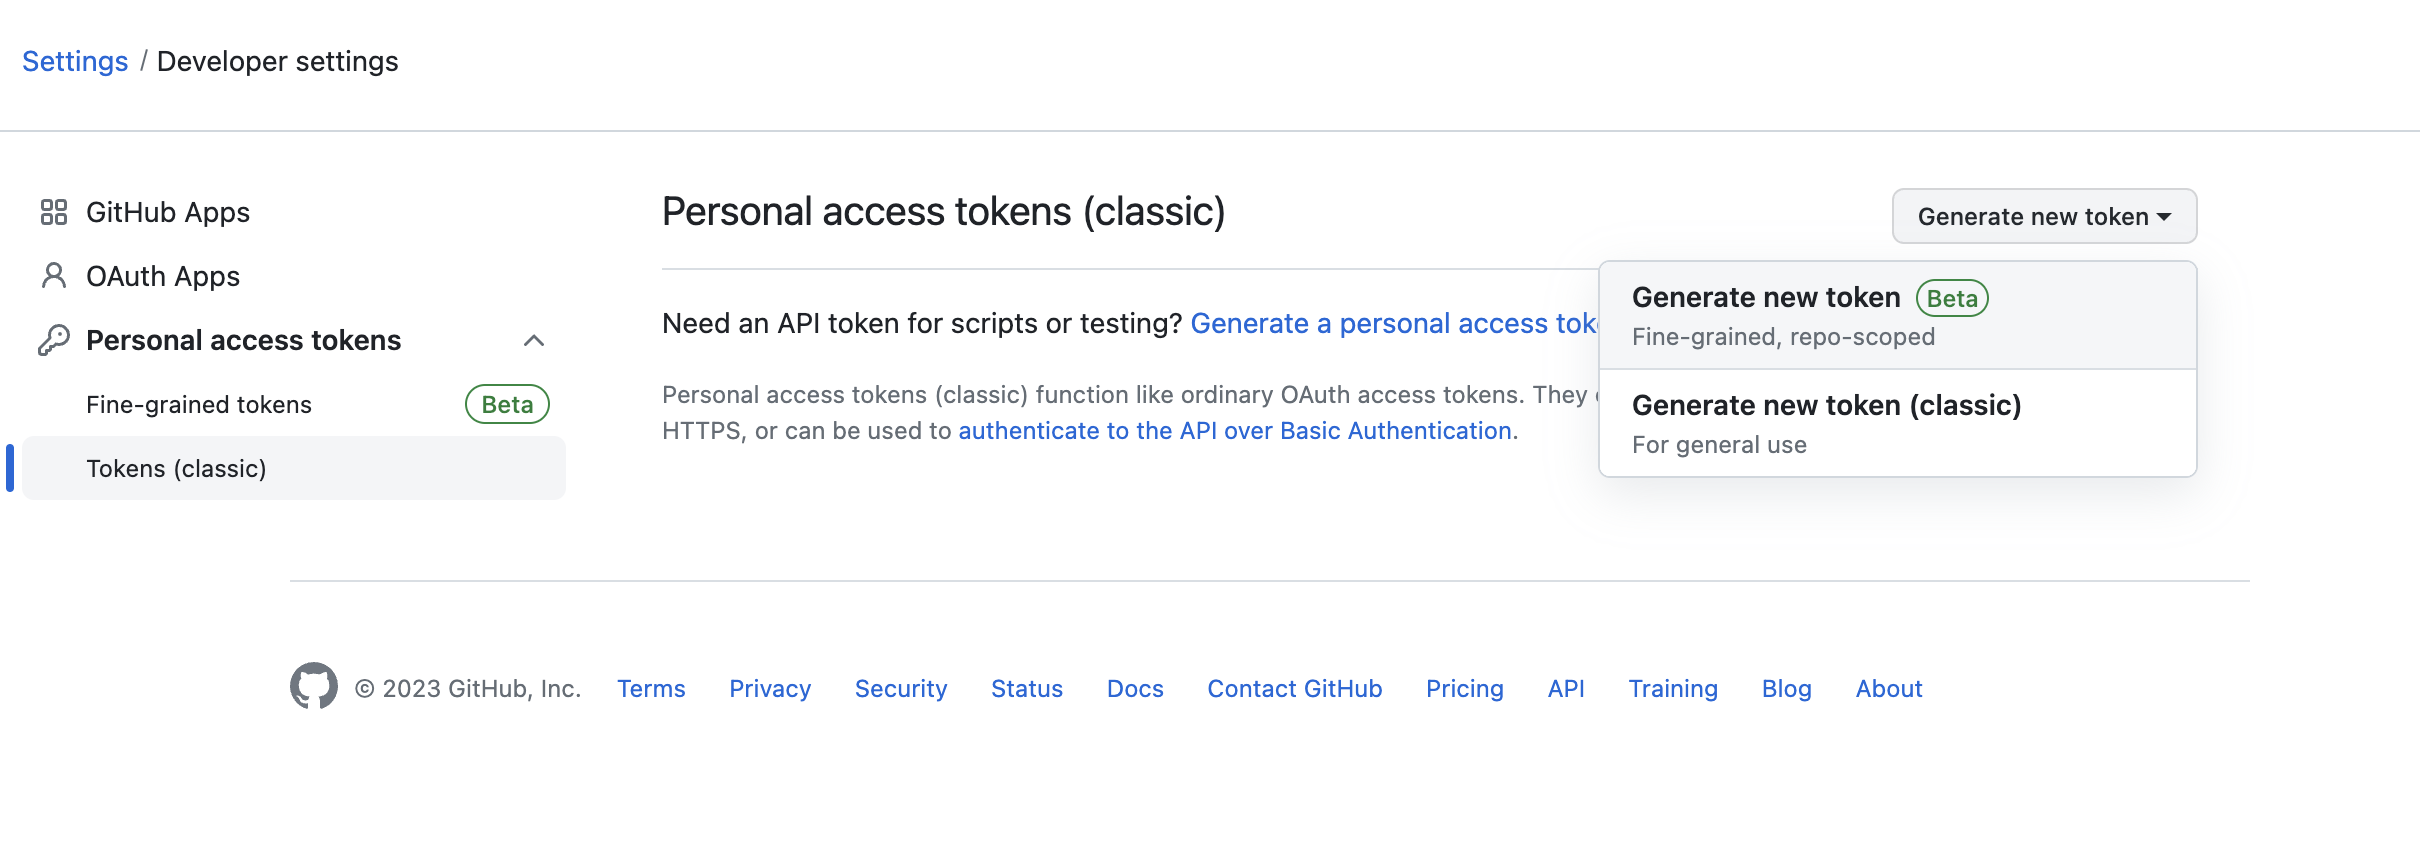 personal-access-tokens.png